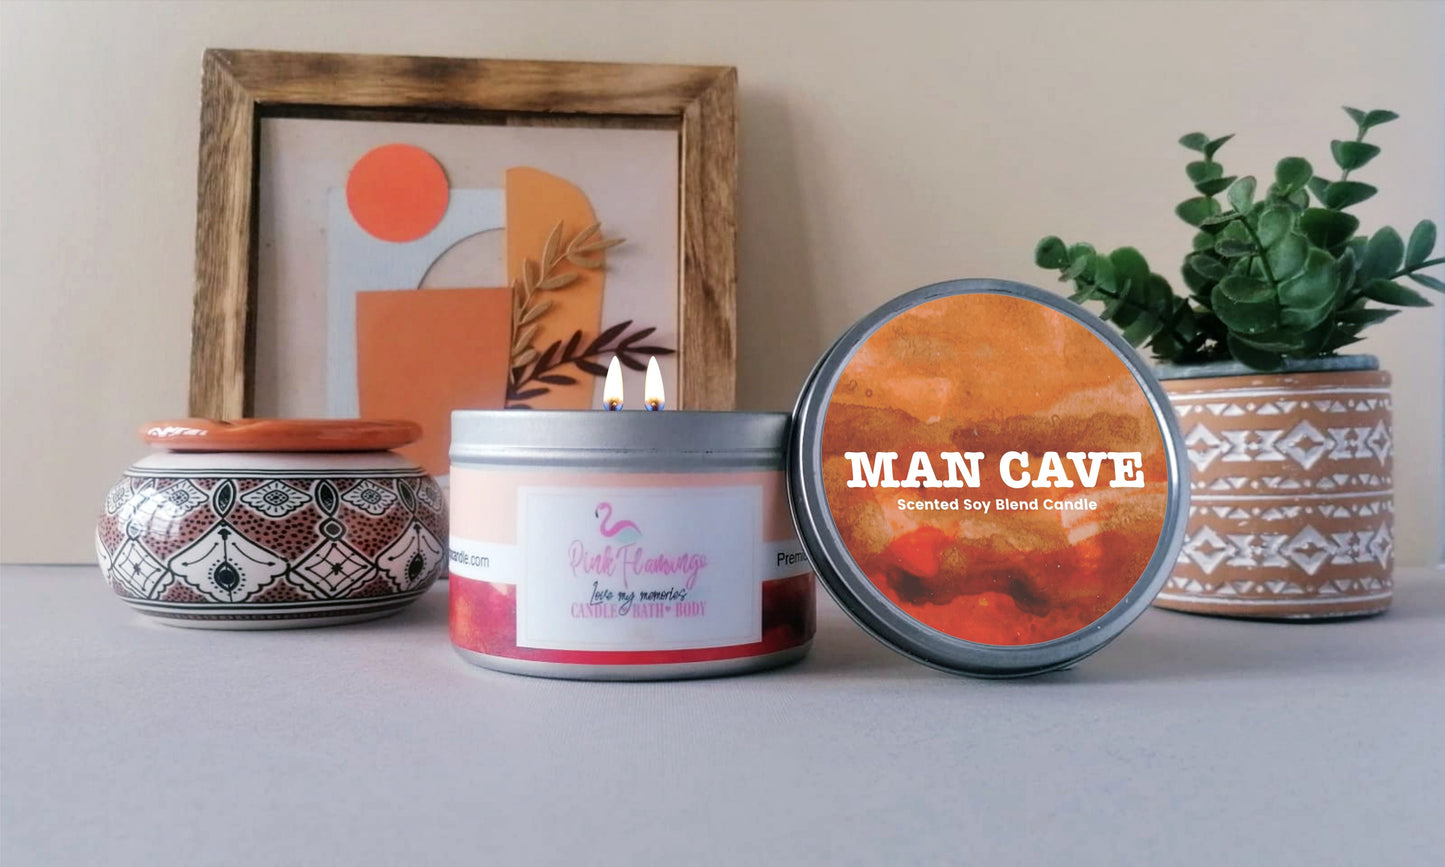 Man cave Candle, Sandalwood and leather